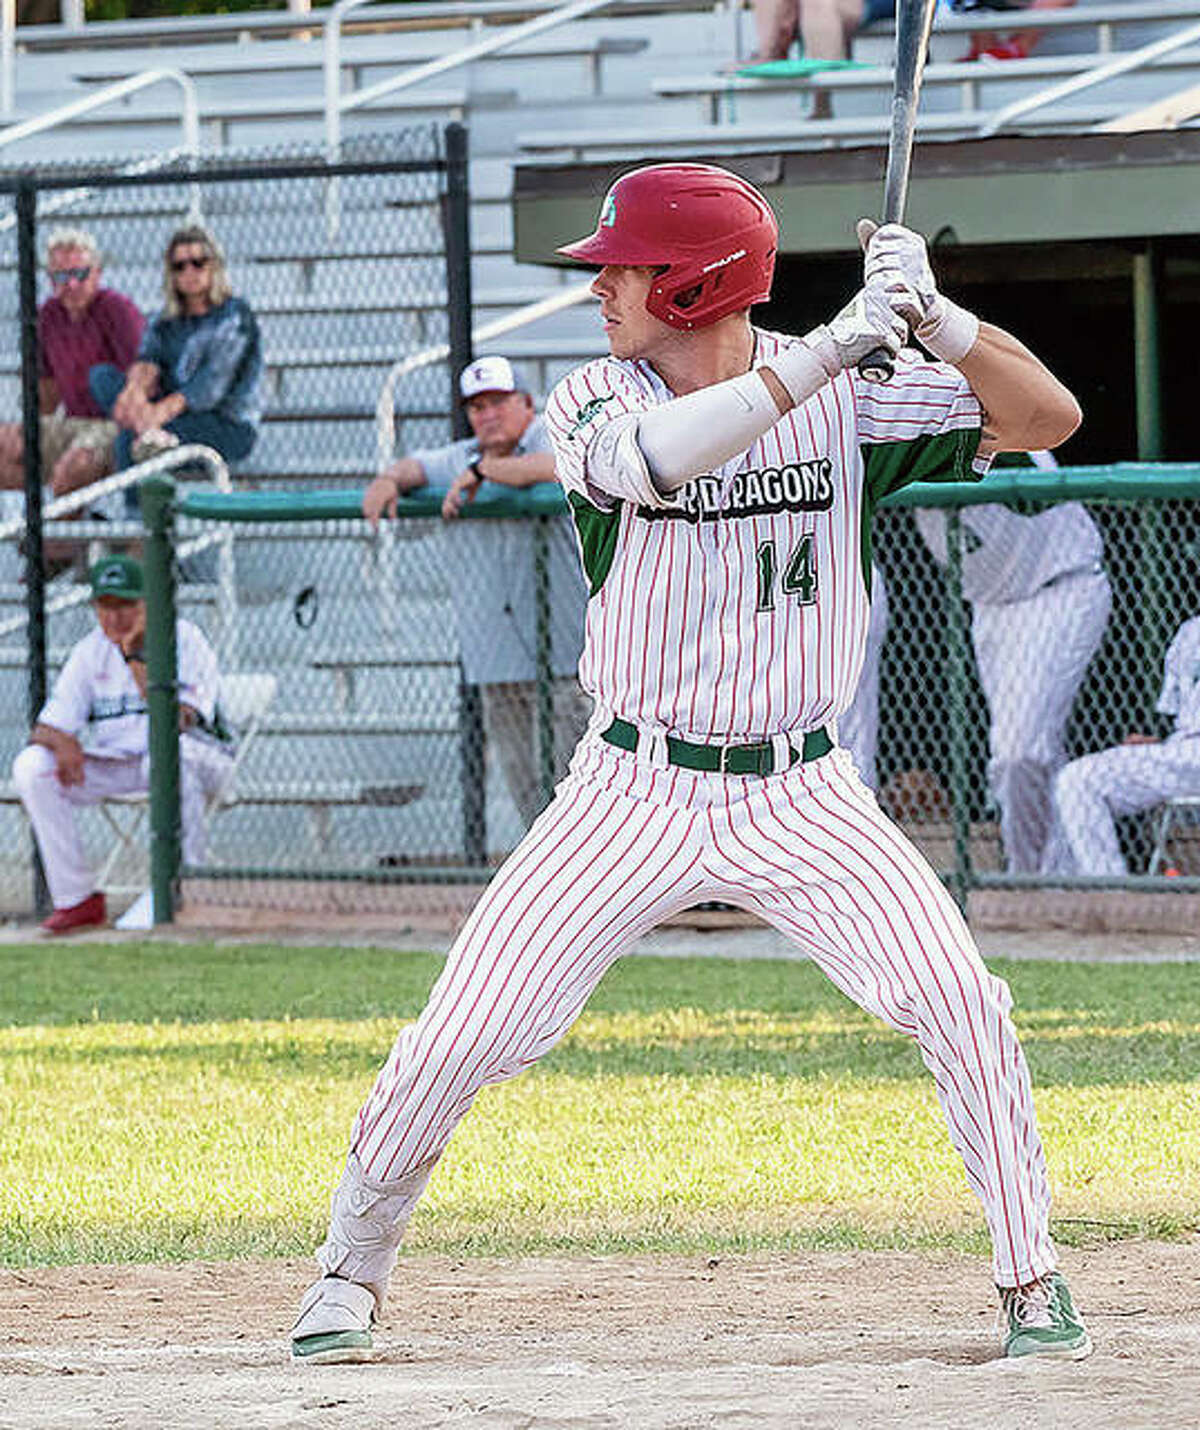 River Dragons defeat Quincy in eight innings